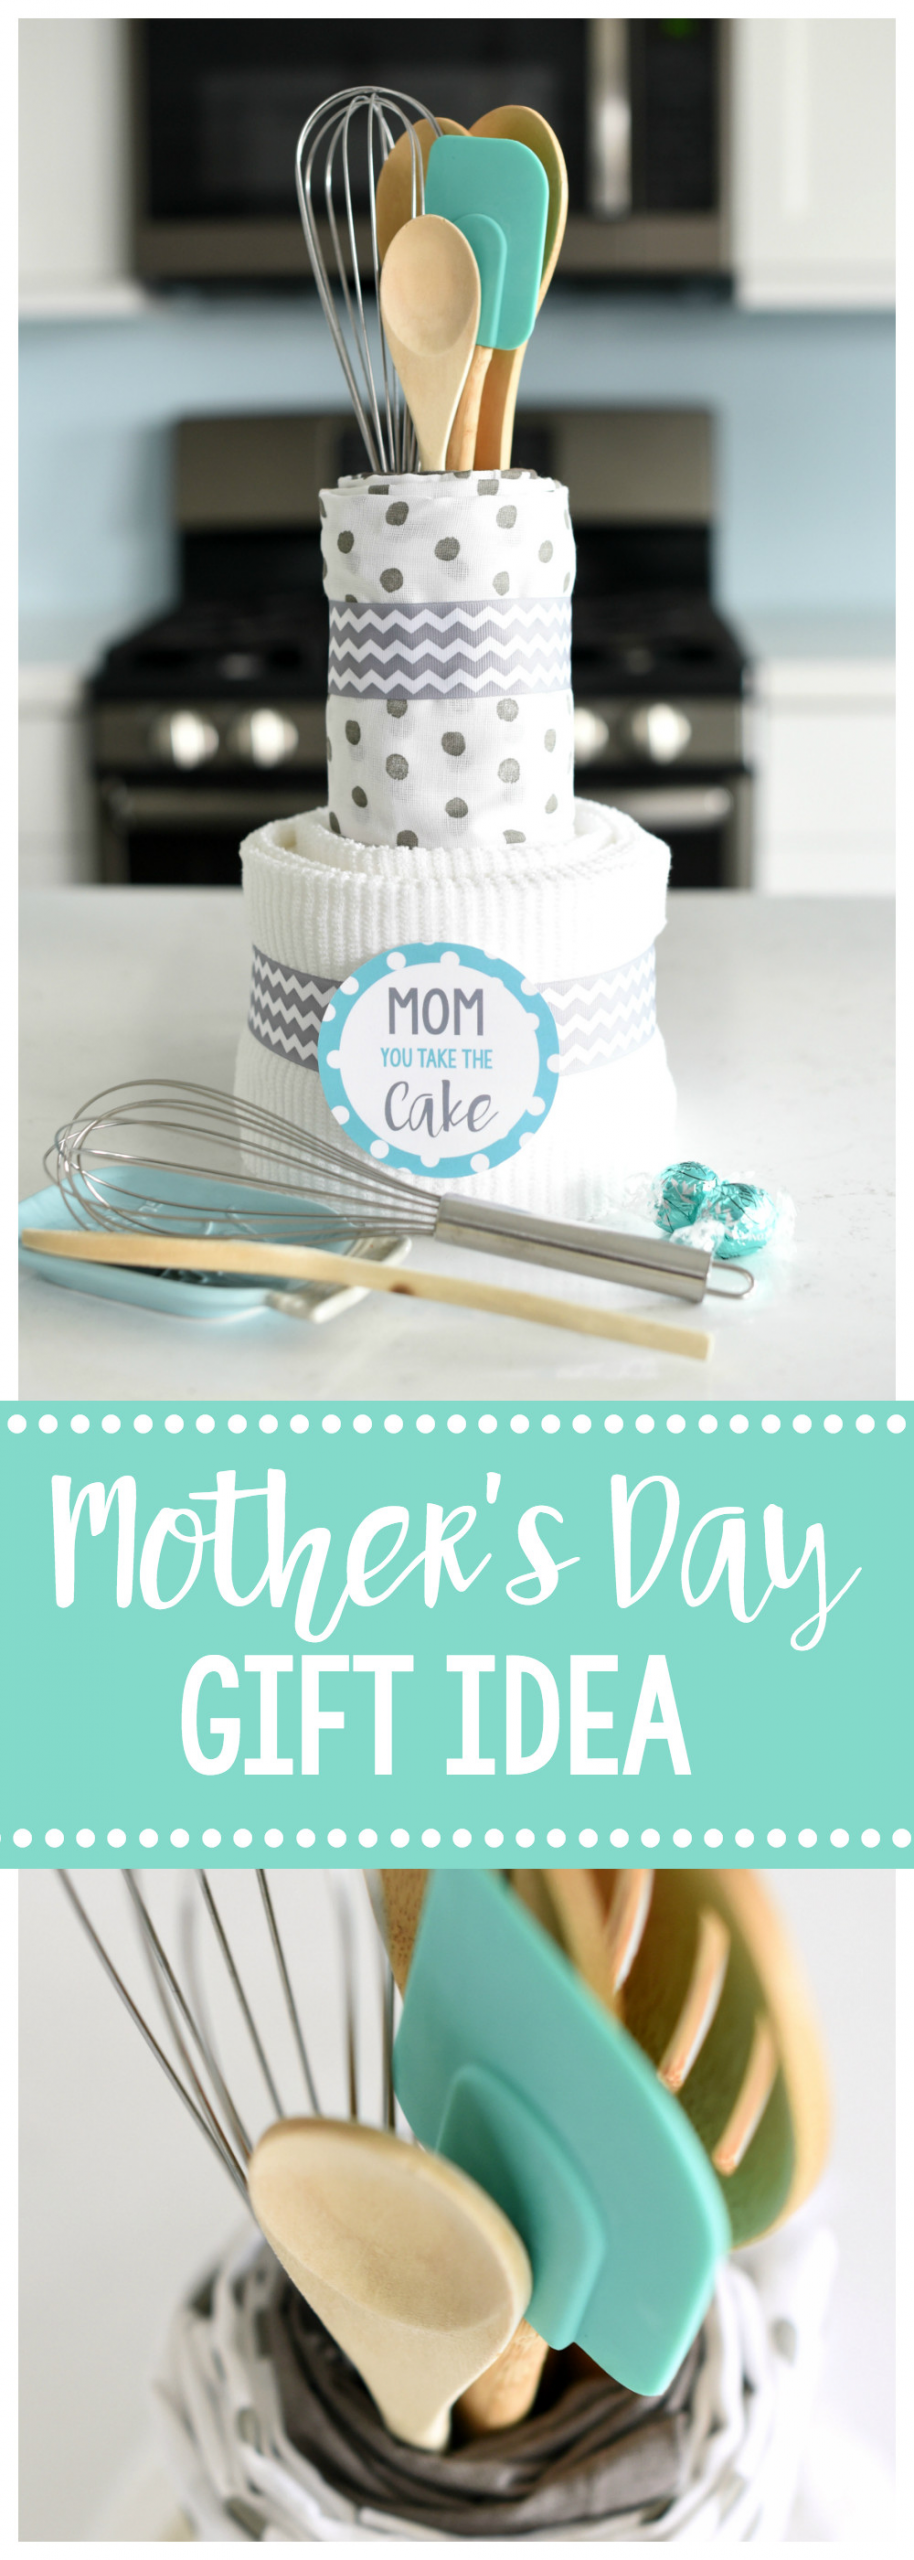 What Is The Best Gift For Mother's Day
 Creative Mother s Day Gifts for Moms Who Love to Cook